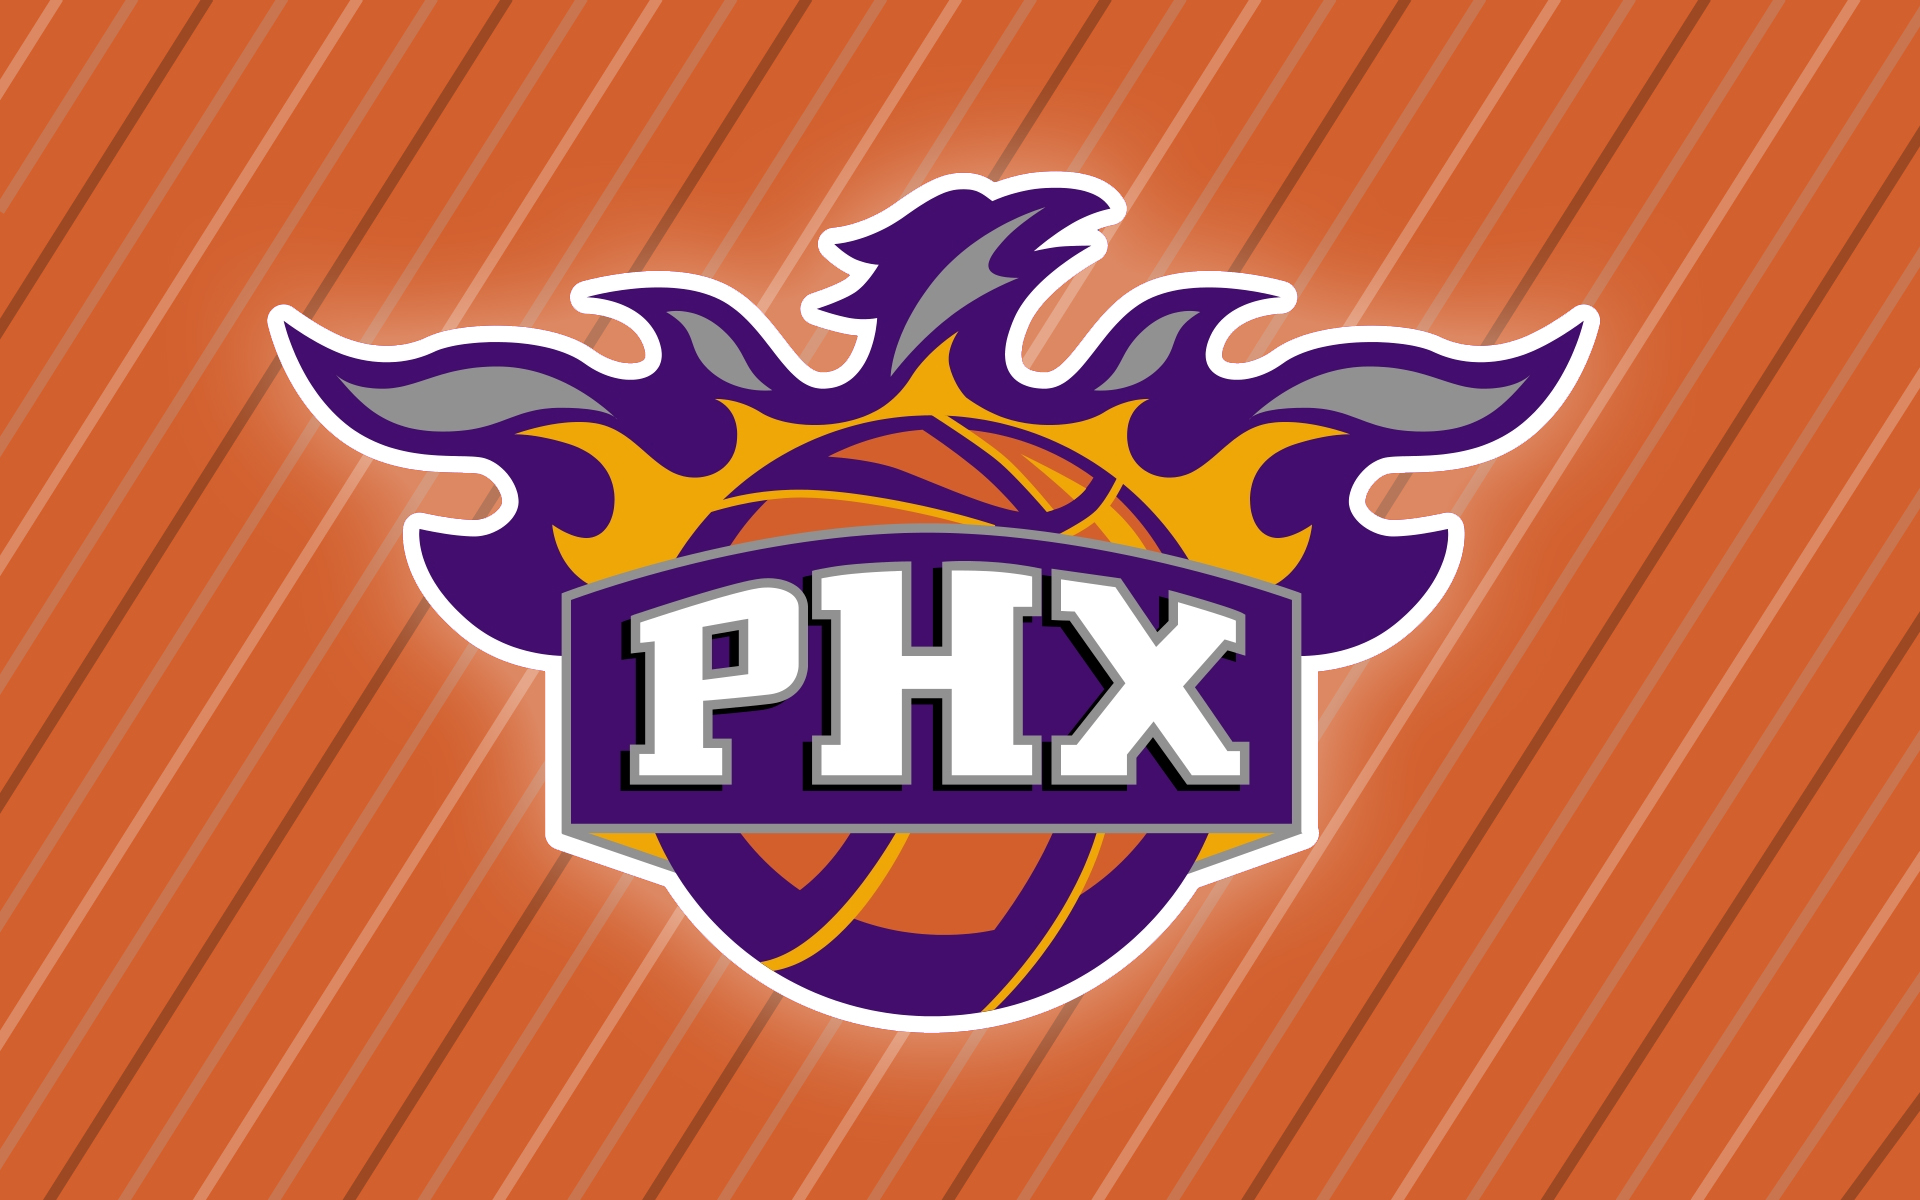 Some Phoenix Suns wallpapers that I created, hope you enjoy! : r/suns